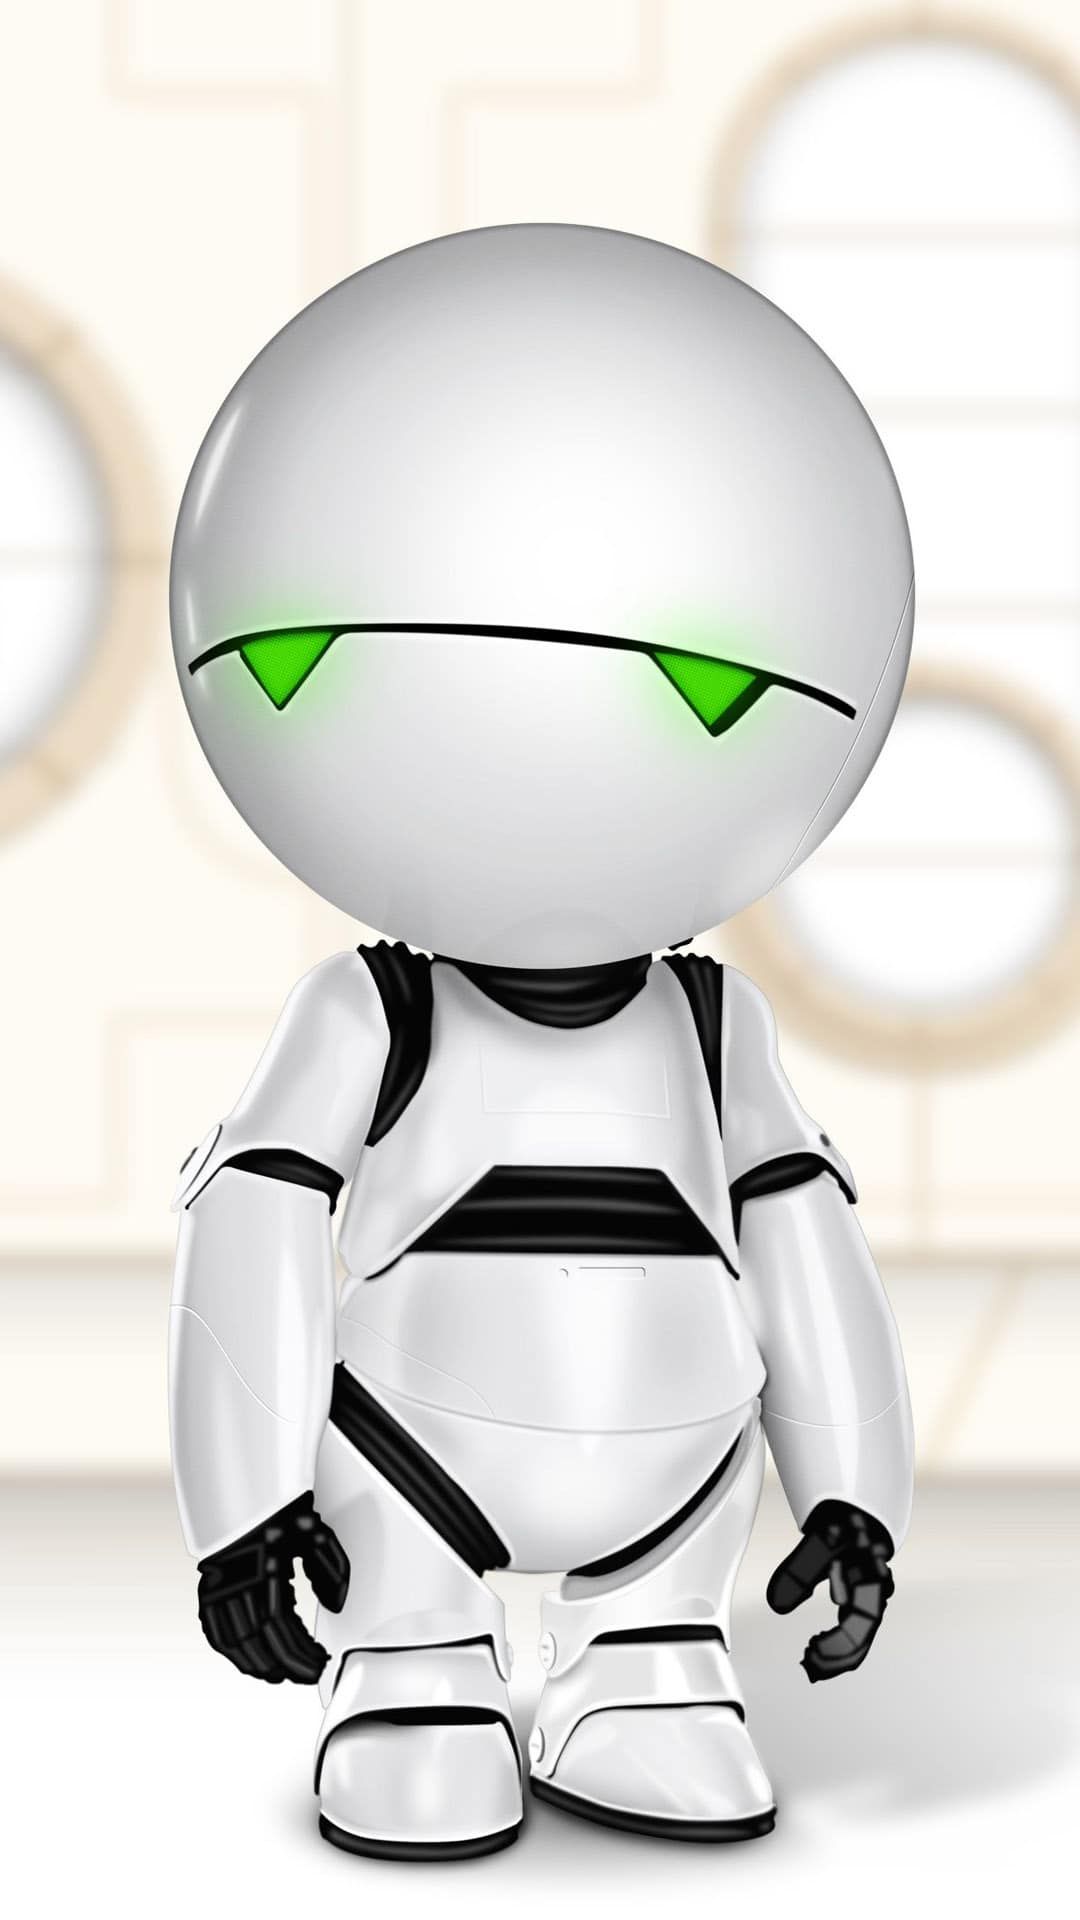 Marvin The Paranoid Android Wallpaper Depressed Robot From